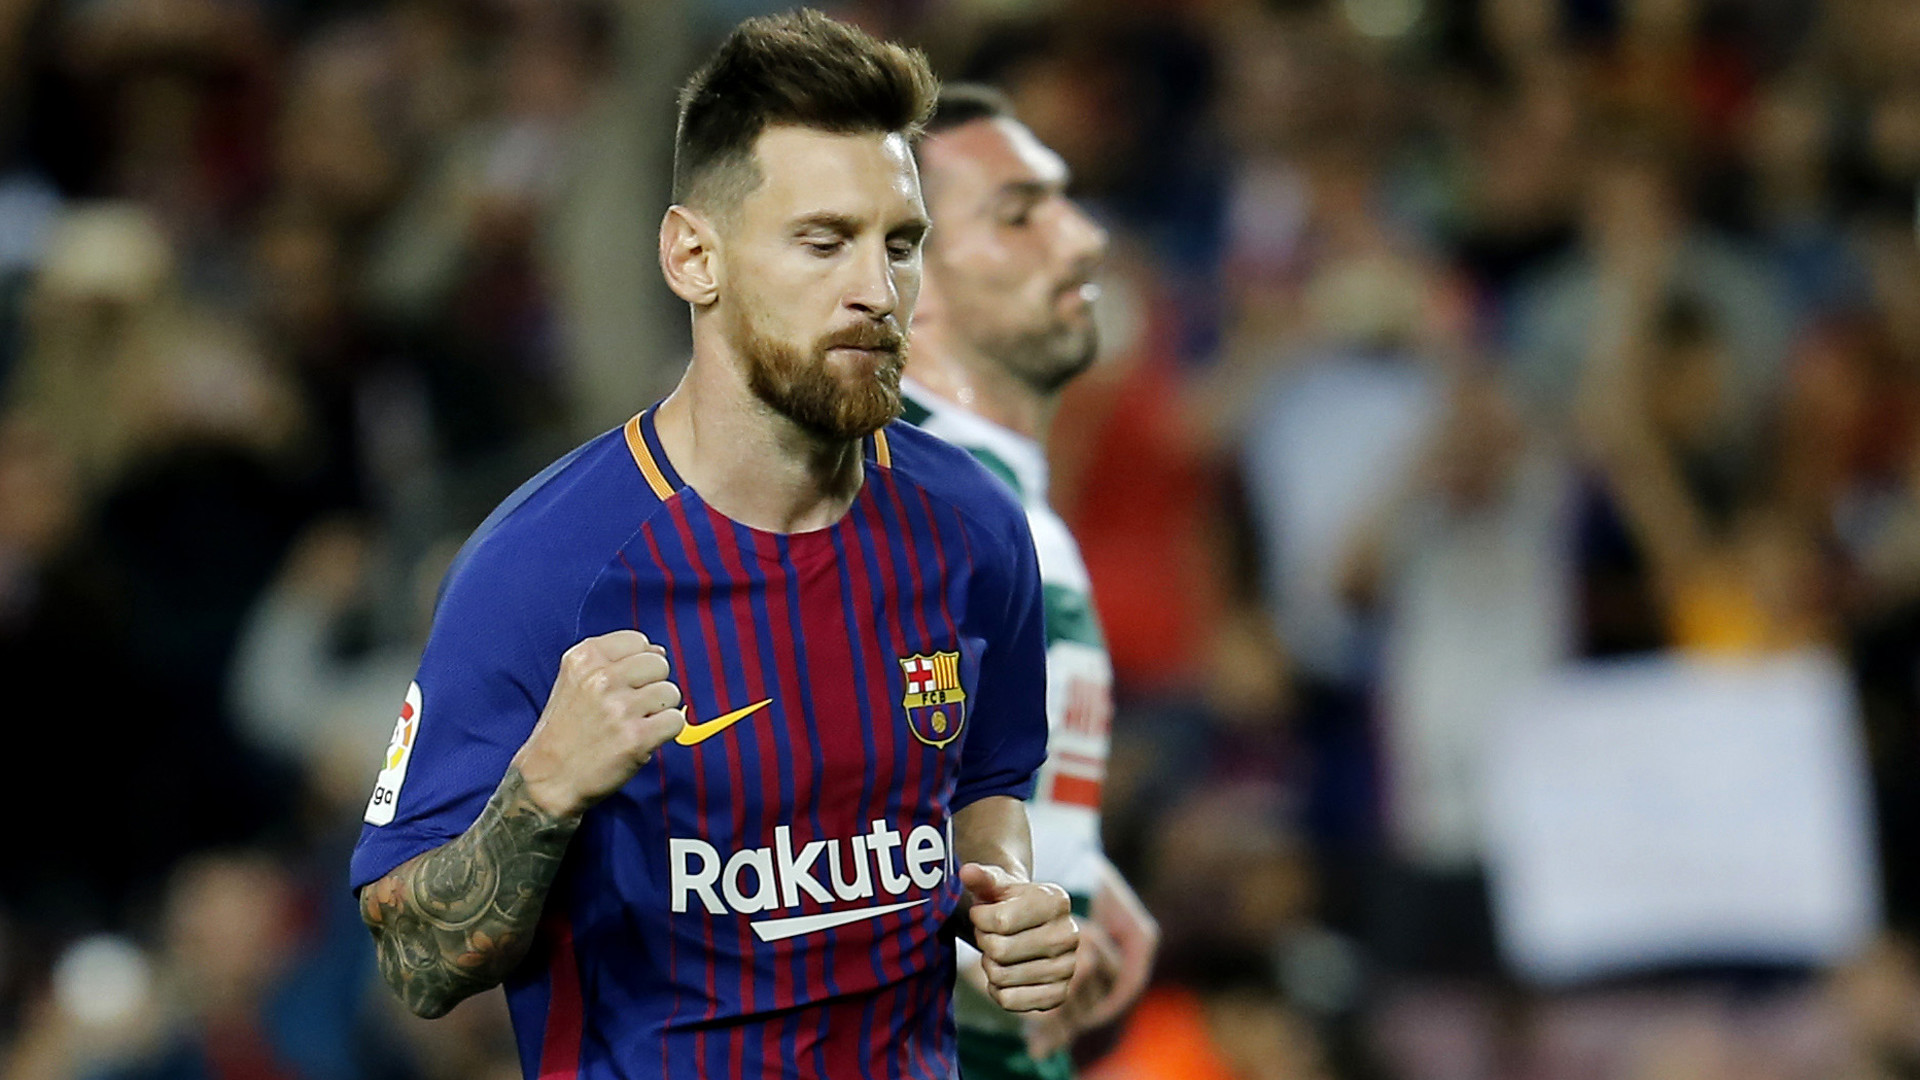 1920x1080 Watch Messi score his 39th hat-trick for Barcelona as he grabbed four goals  in the 6-1 rout of Eibar on September 19